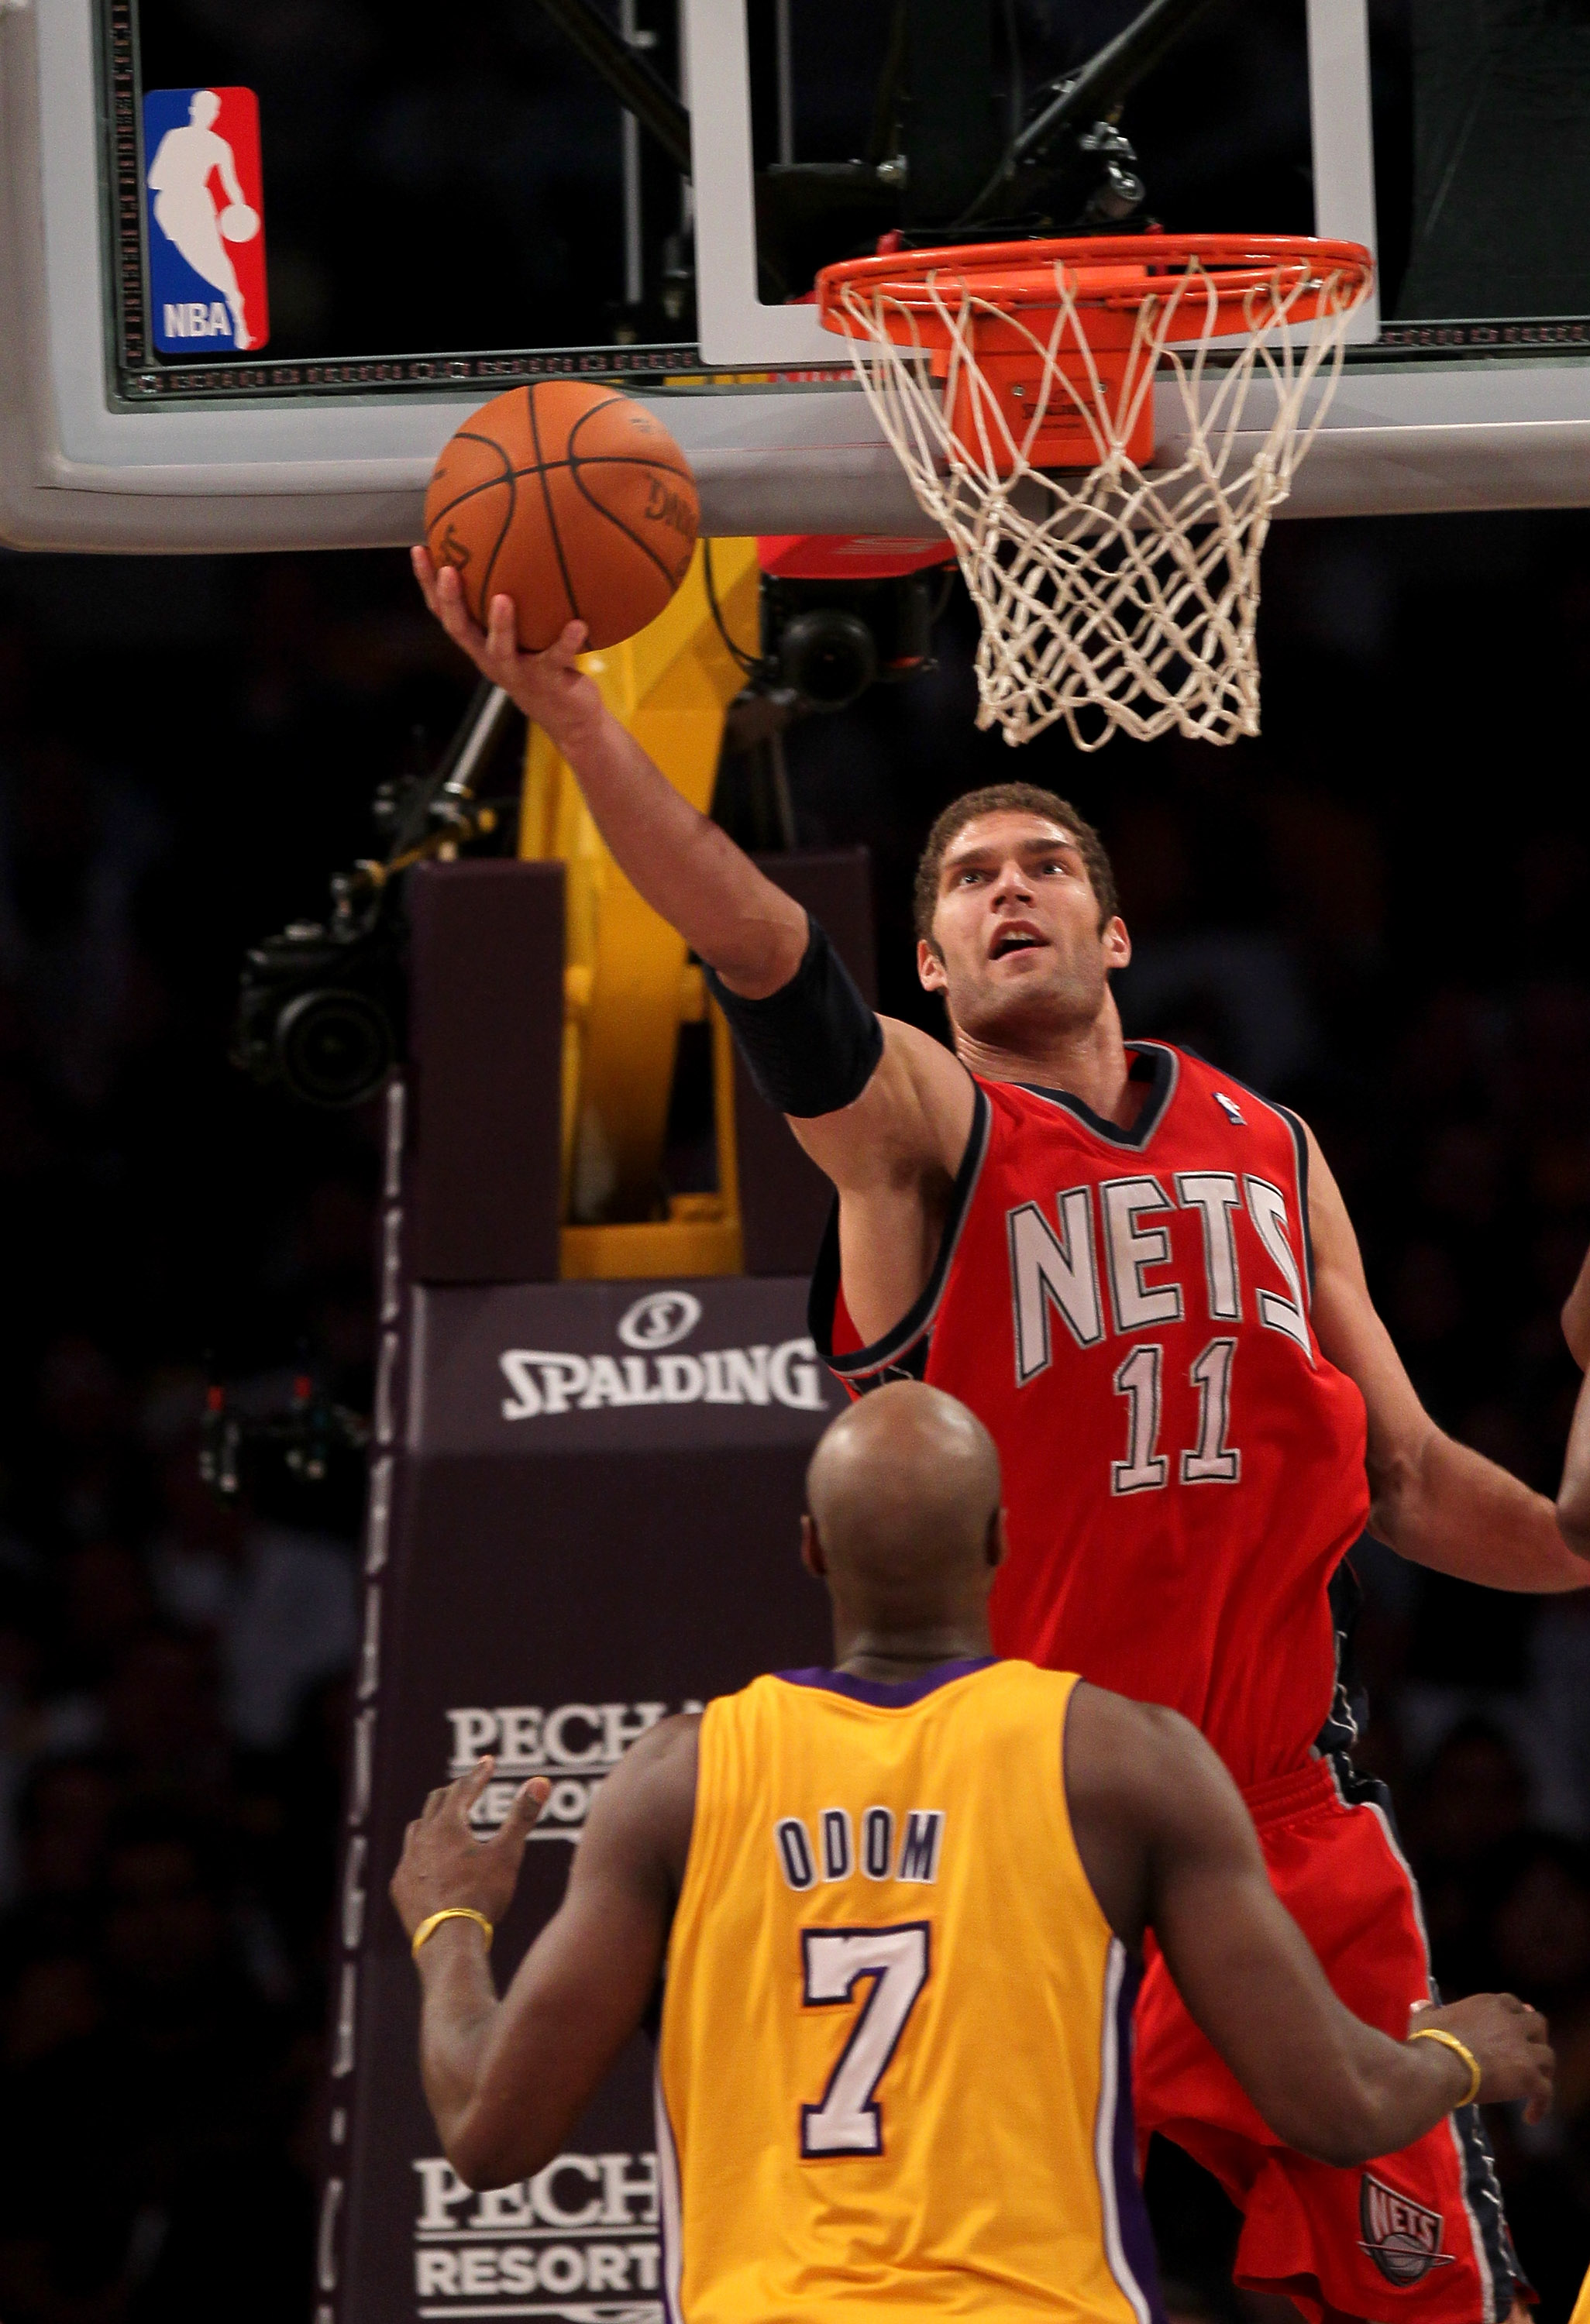 LOS ANGELES, CA - JANUARY 14:  Brook Lopez #11 of the New Jersey Nets shoots over Lamar Odom #7 of the Los Angeles Lakers at Staples Center on January 14, 2011 in Los Angeles, California. The Lakers won 100-88.  NOTE TO USER: User expressly acknowledges a